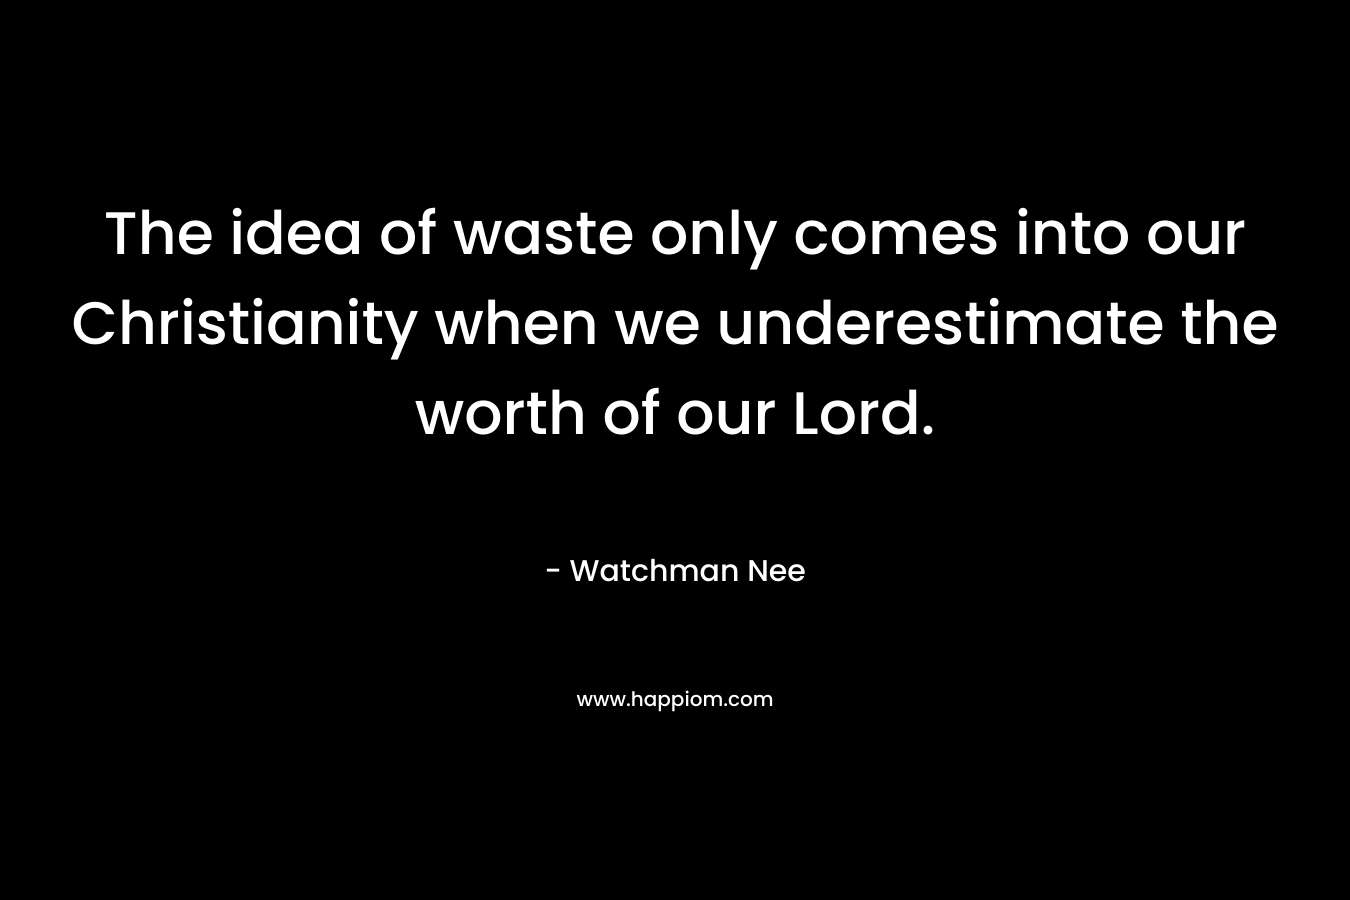 The idea of waste only comes into our Christianity when we underestimate the worth of our Lord. – Watchman Nee